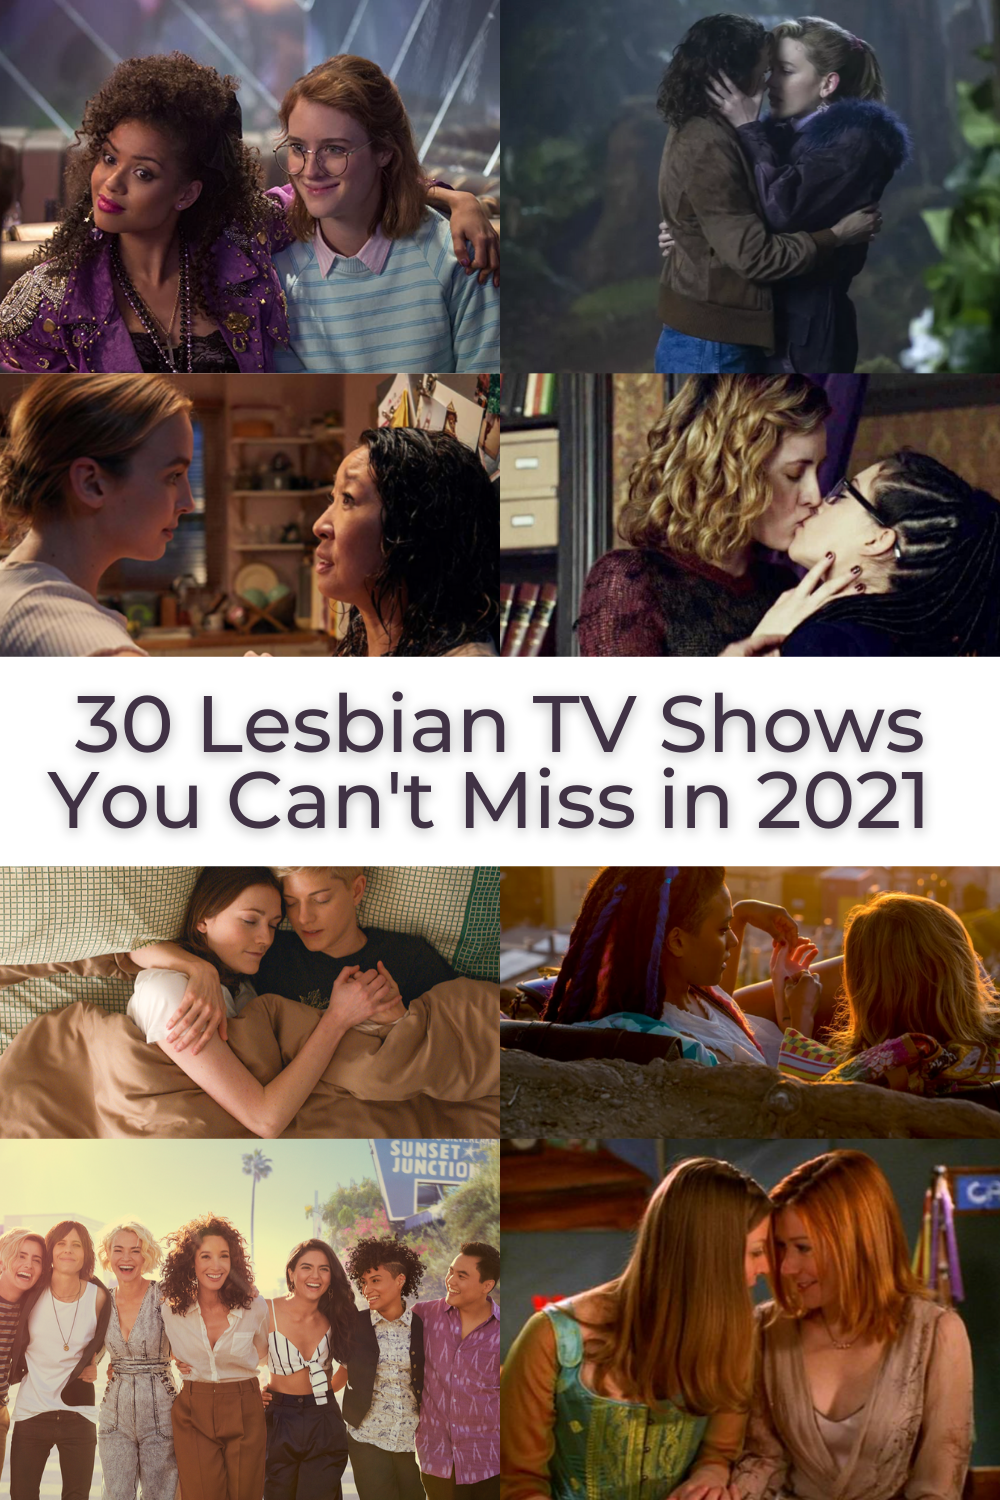 The 30 Best Queer and Lesbian TV Shows in 2021